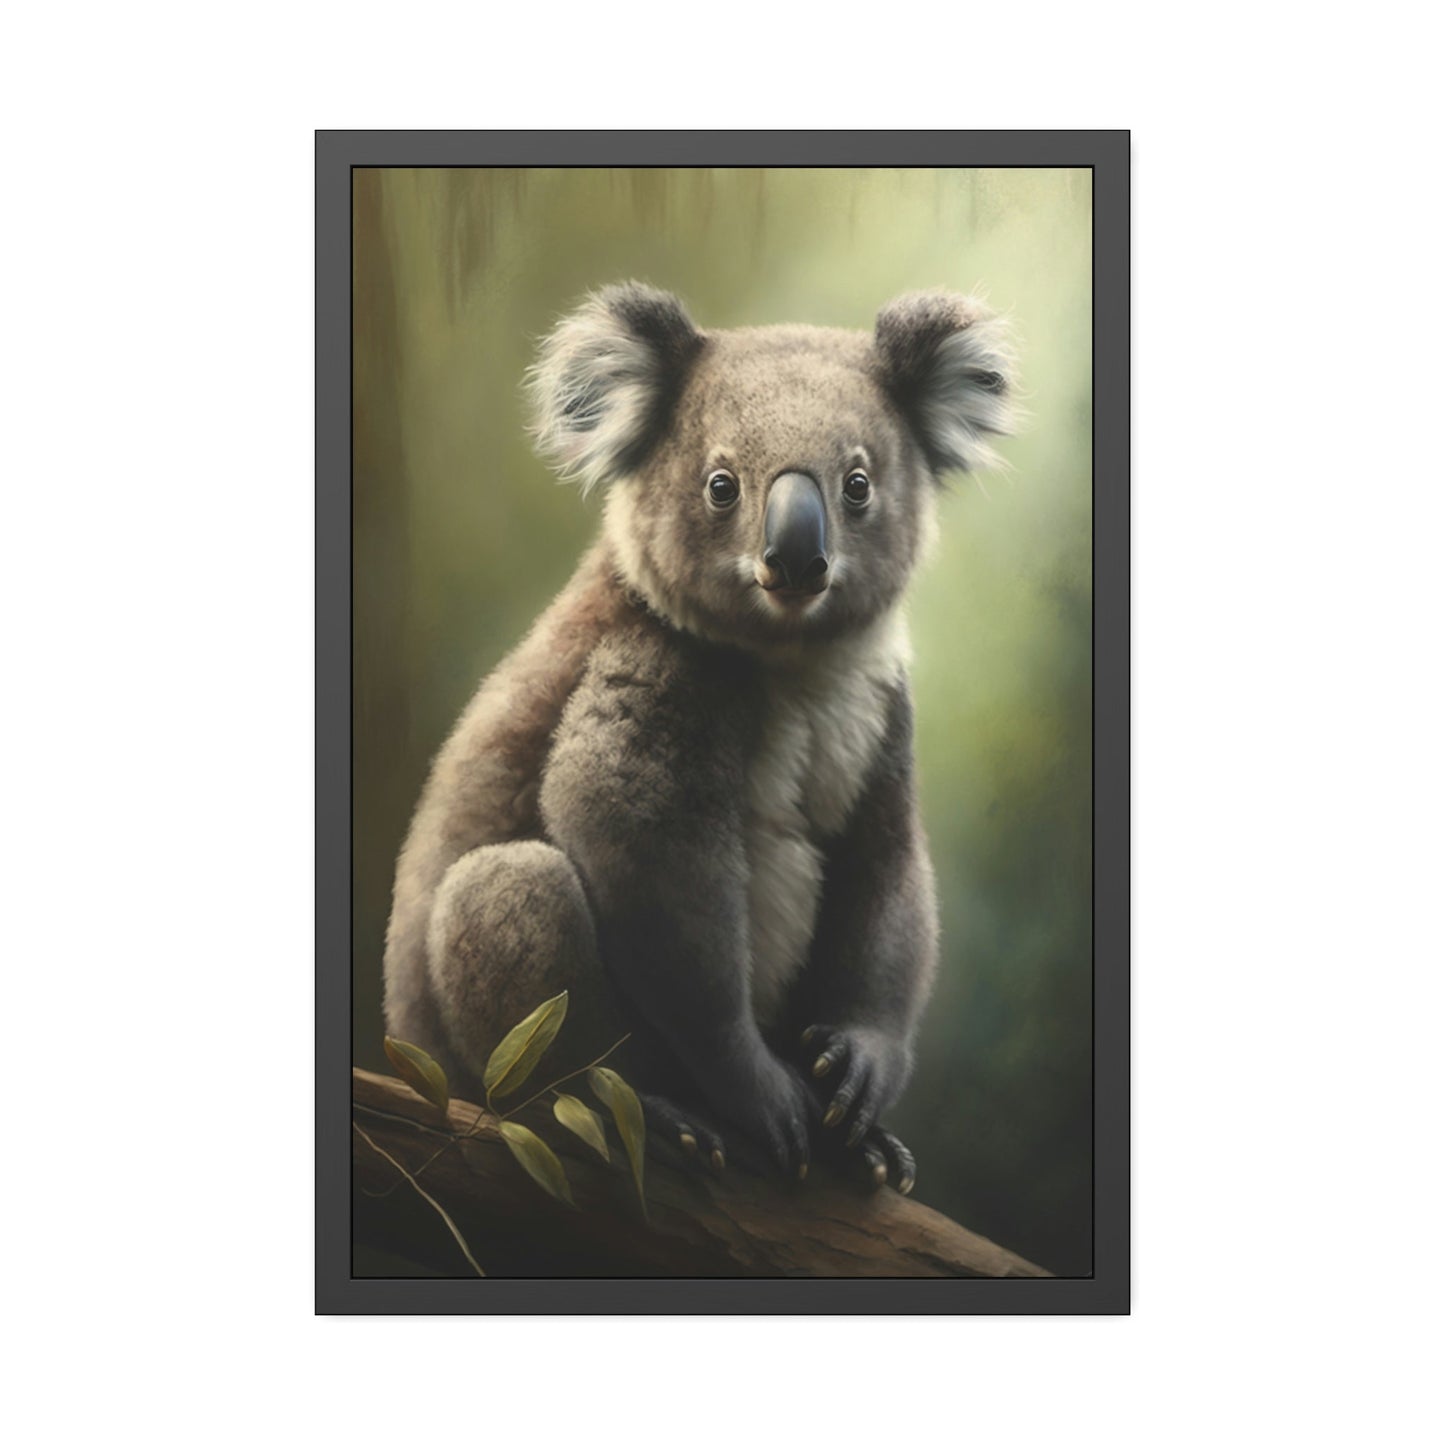 Koala Love: A Whimsical and Colorful Painting on Canvas